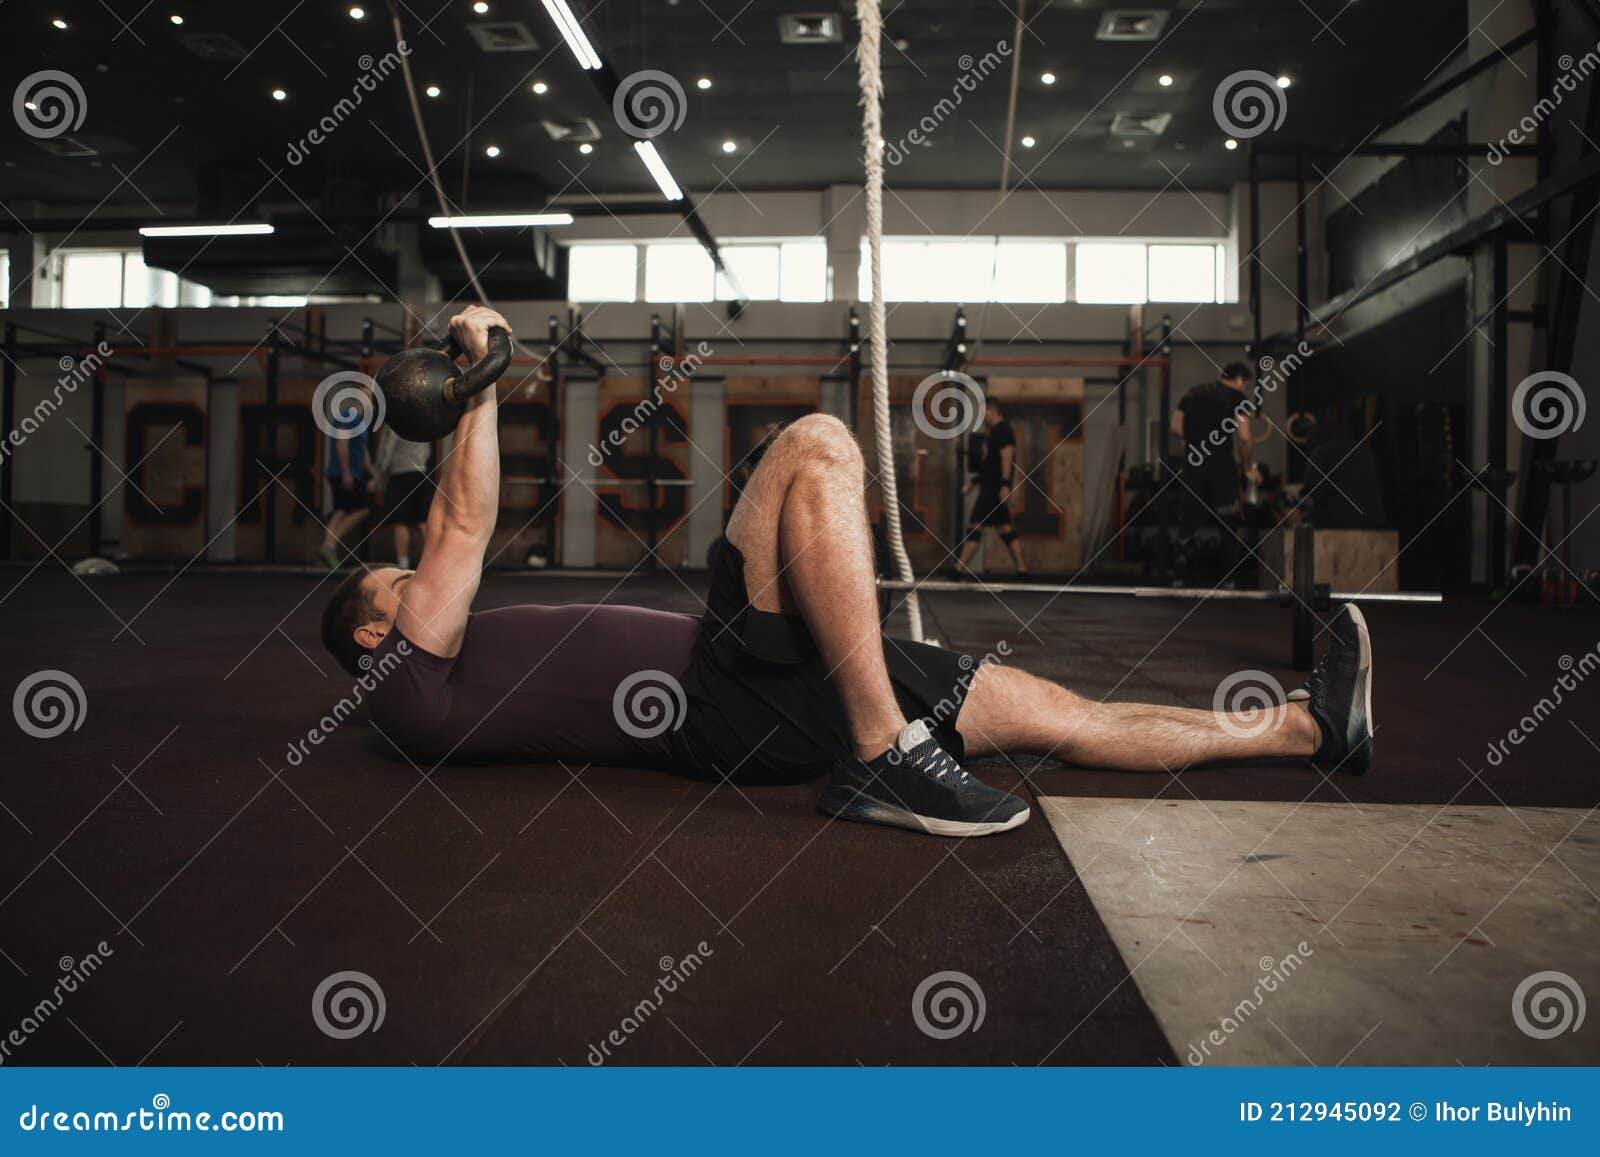 male cross fit athlete working out at the gym